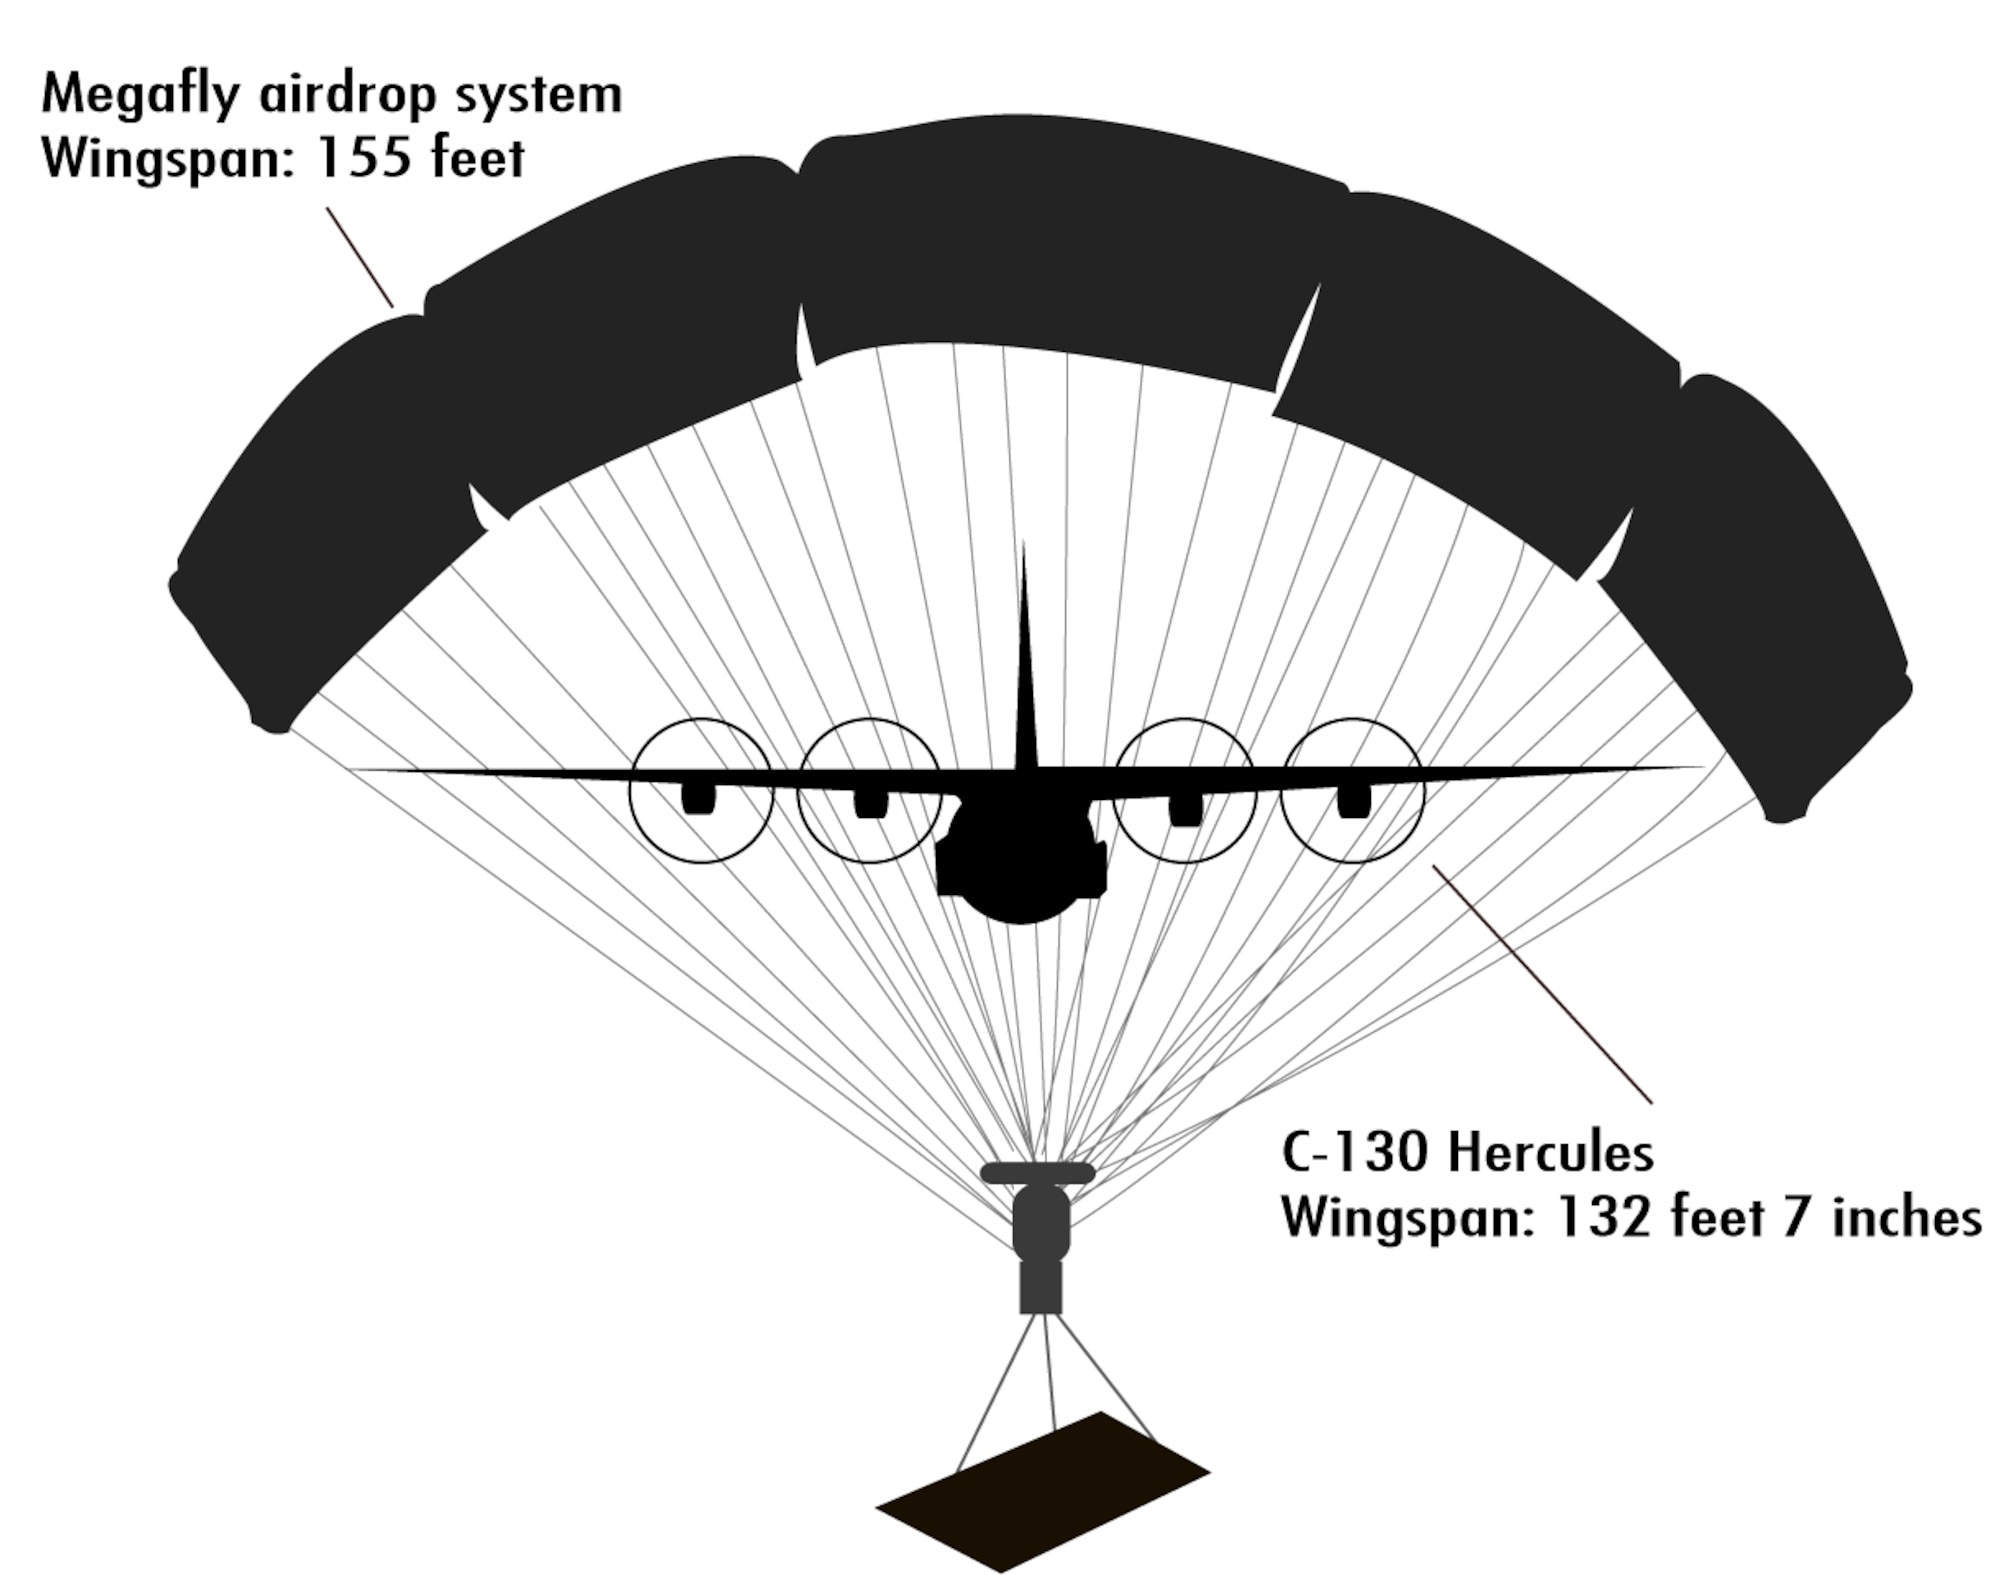 The Megafly airdrop system has a 155 foot wingspan, 25 feet larger than the C-130’s wingspan. Pulled out of the aircraft by a standard 28-foot extraction parachute, the Megafly then deploys this parachute for heavy loads in a situation where precision is mandatory. Aided by computing power from the aircraft and GPS signals, the system is capable of guiding itself to a specific spot on the drop zone. Courtesy graphic